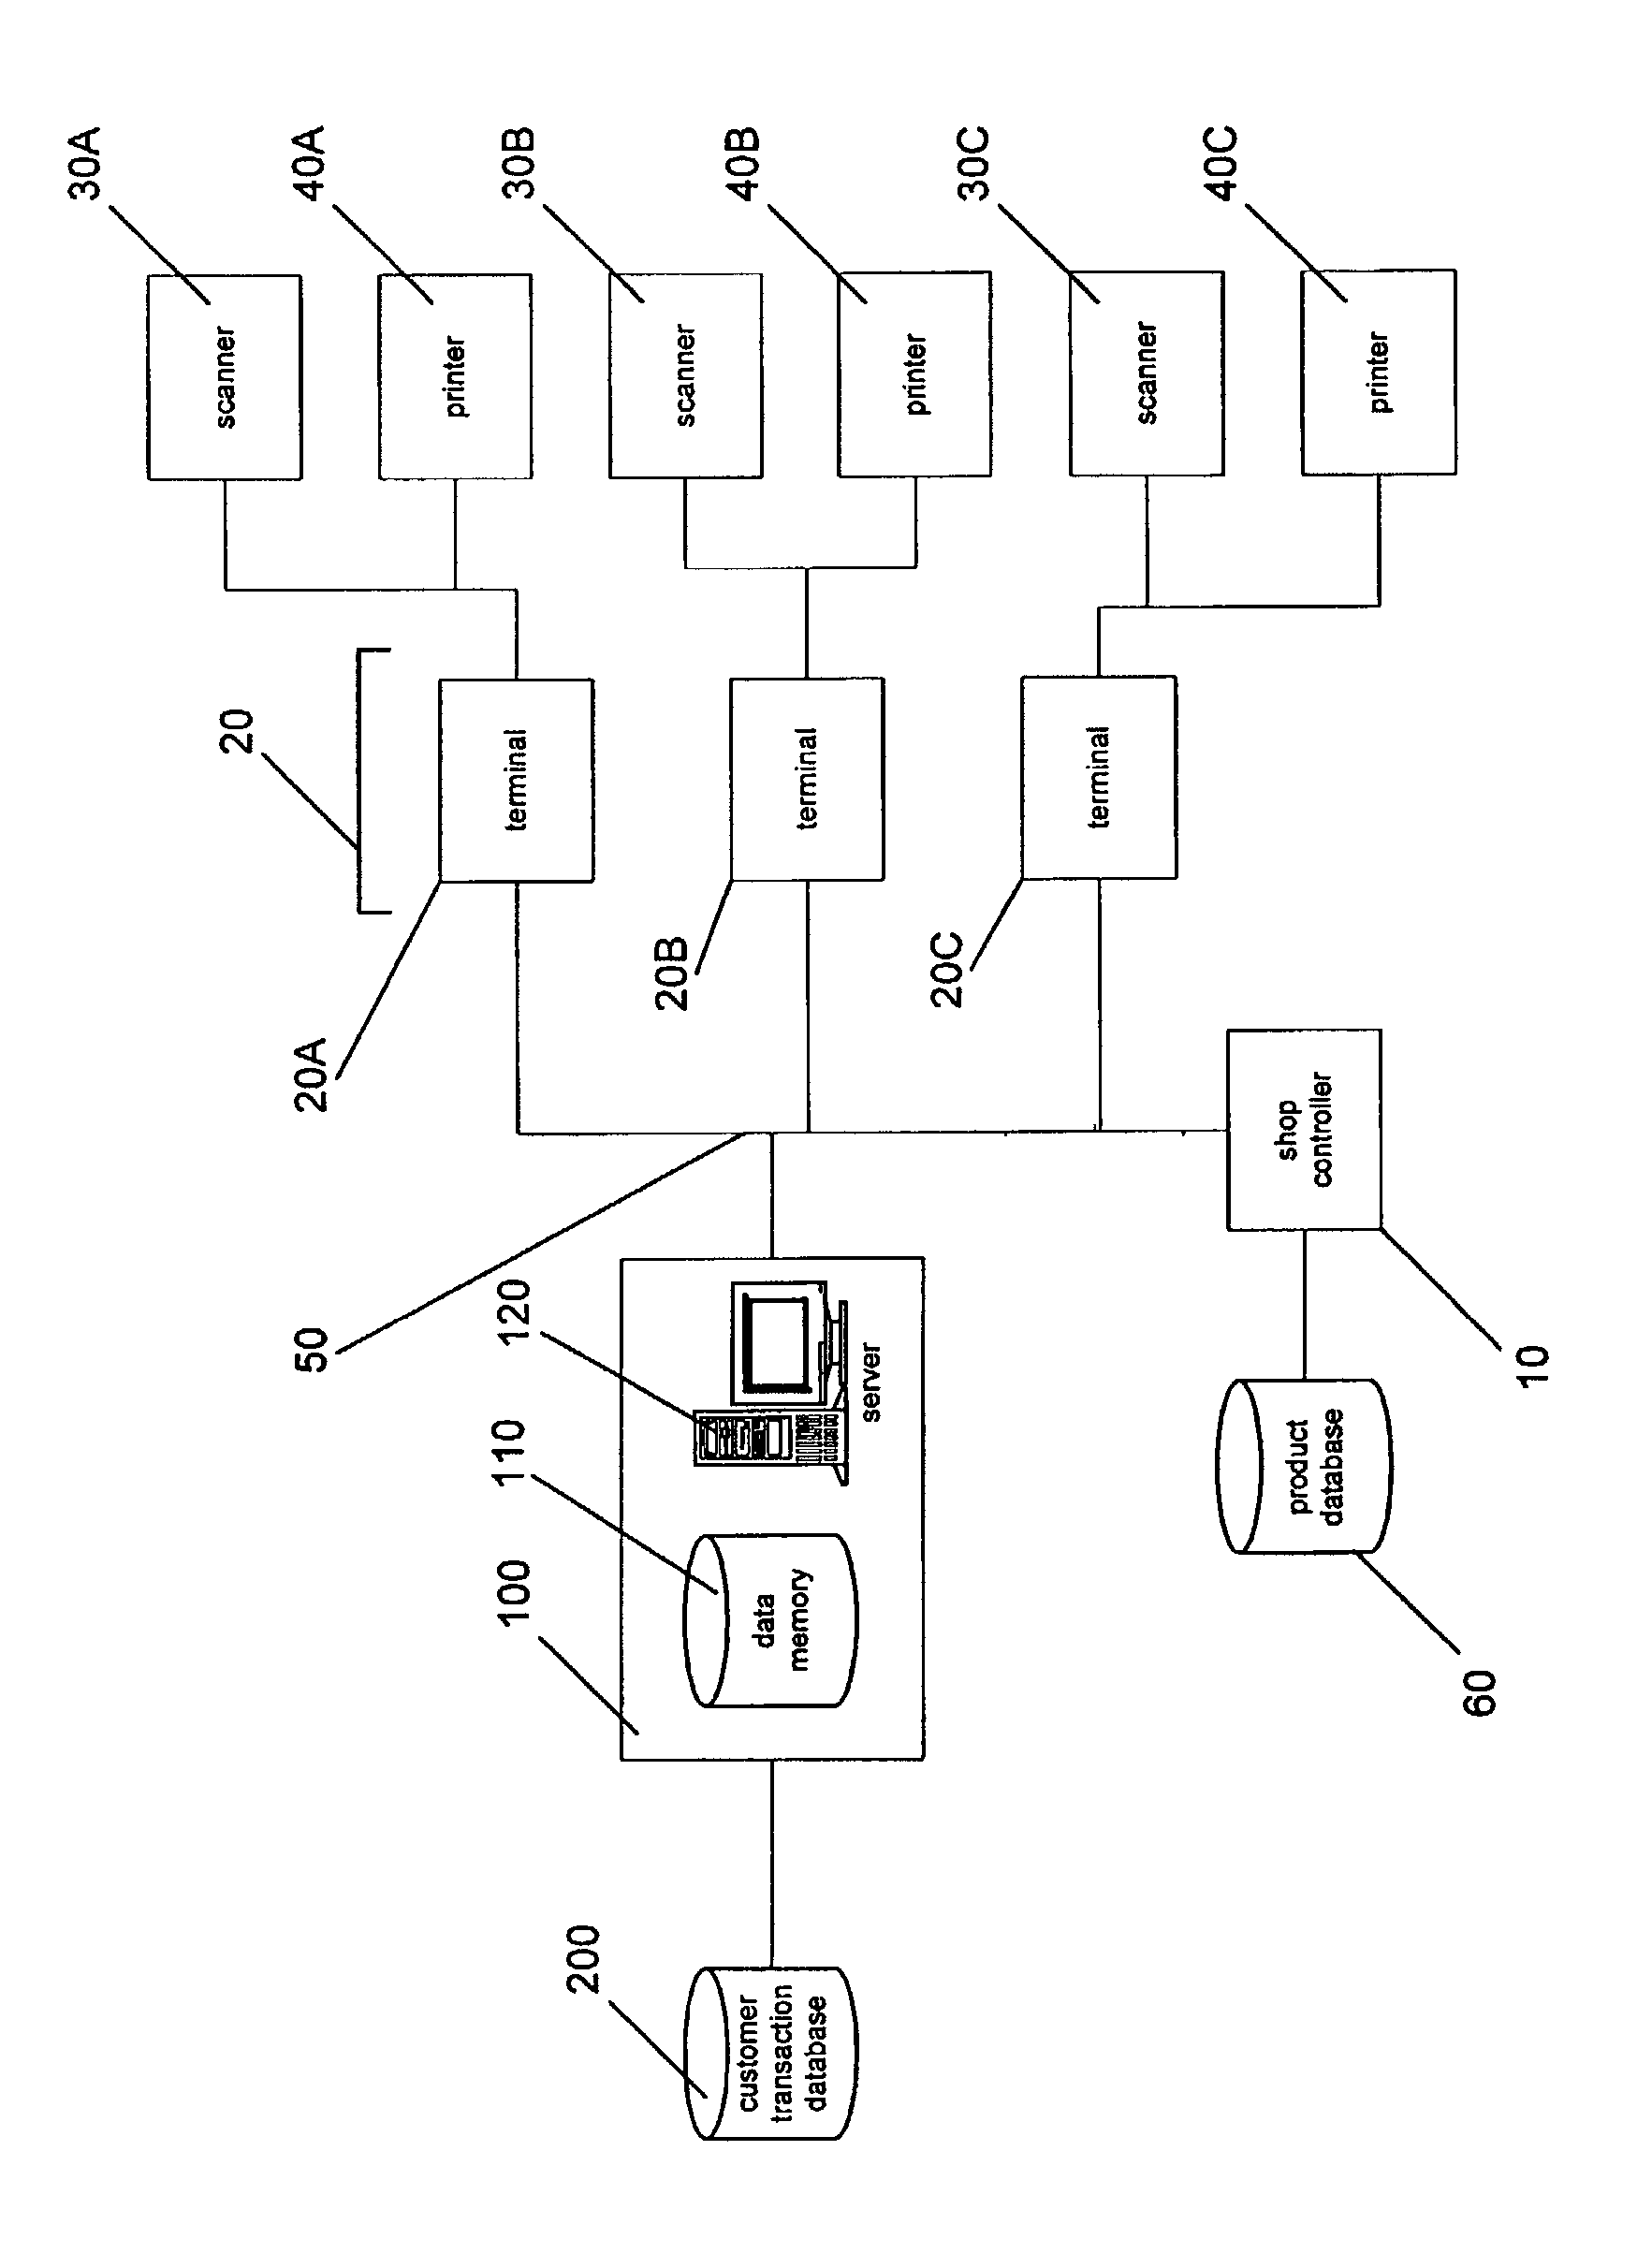 Incentive based purchasing system and method